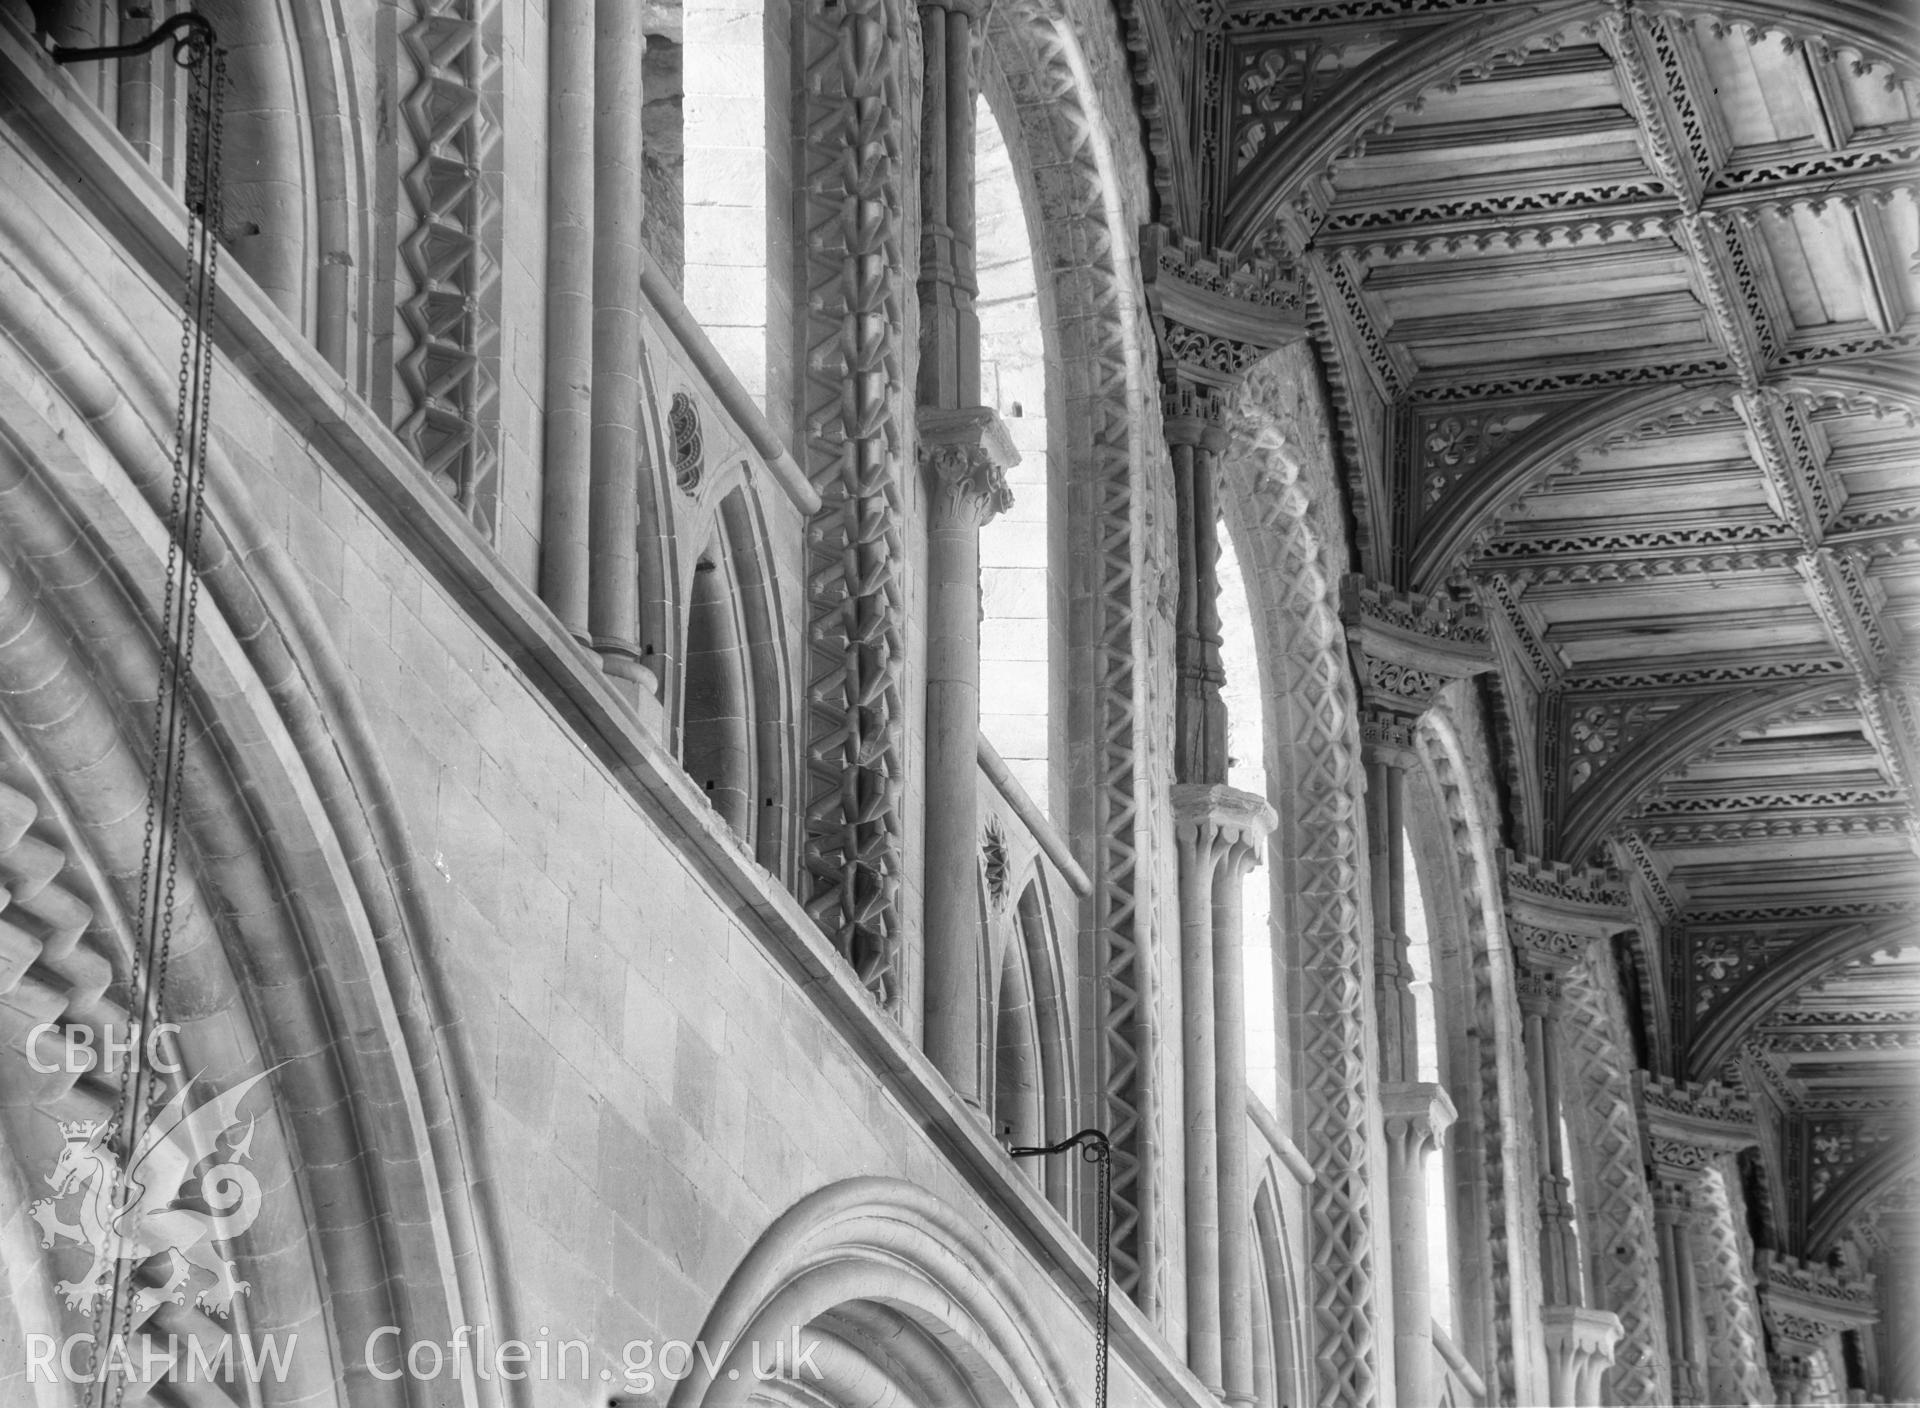 Digital copy of a black and white nitrate negative showing decorated arches and ceiling pendants at St. David's Cathedral, taken by E.W. Lovegrove, July 1936